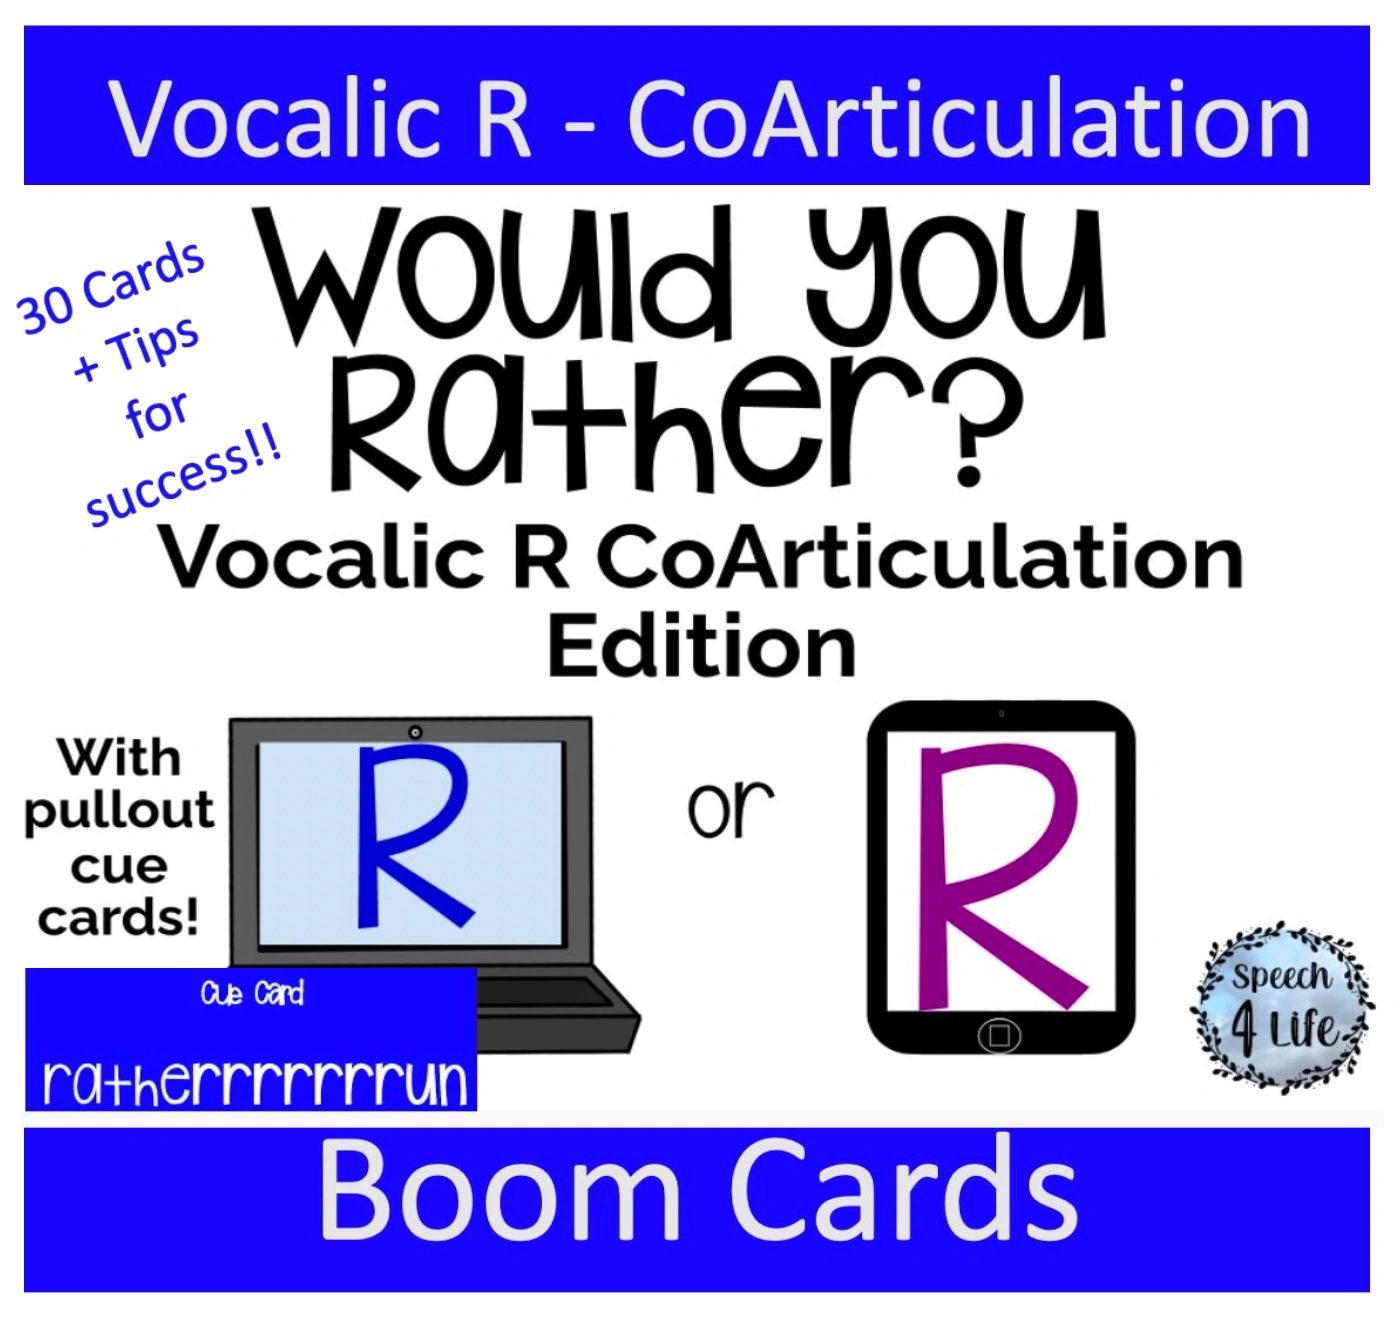 Would you rather Vocalic /r/